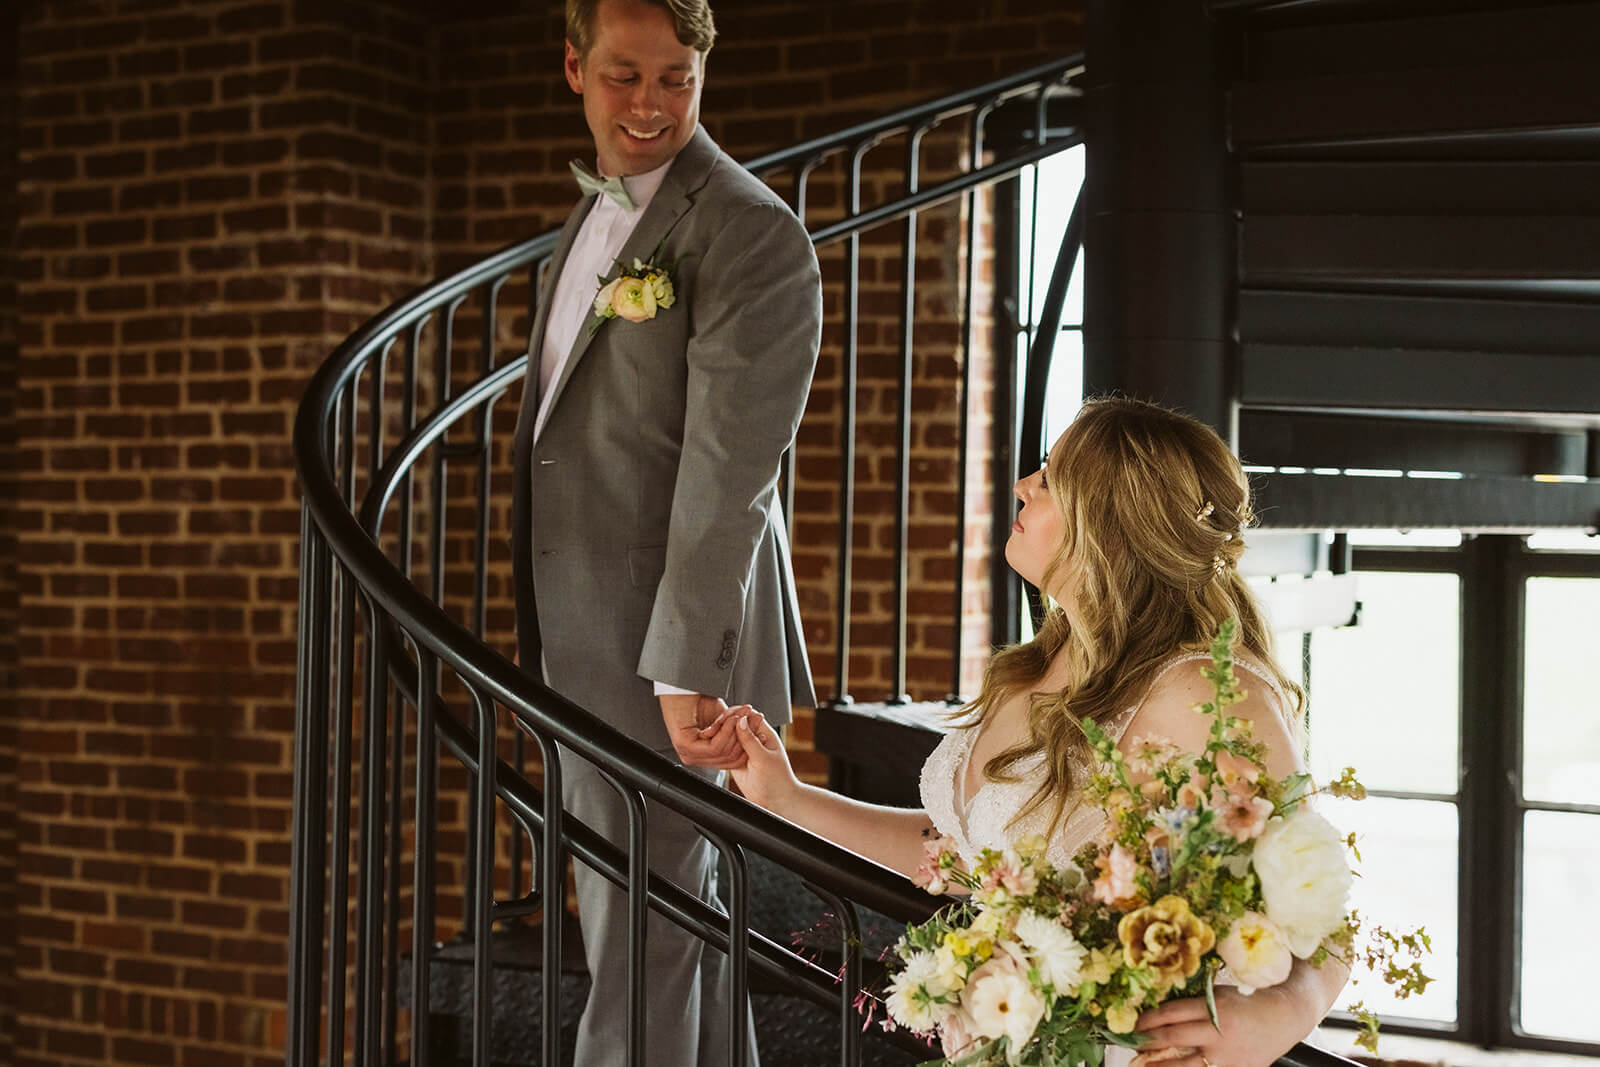 Bride and groom portraits in the Turnbull Building in Chattanooga. Photo by OkCrowe Photography.